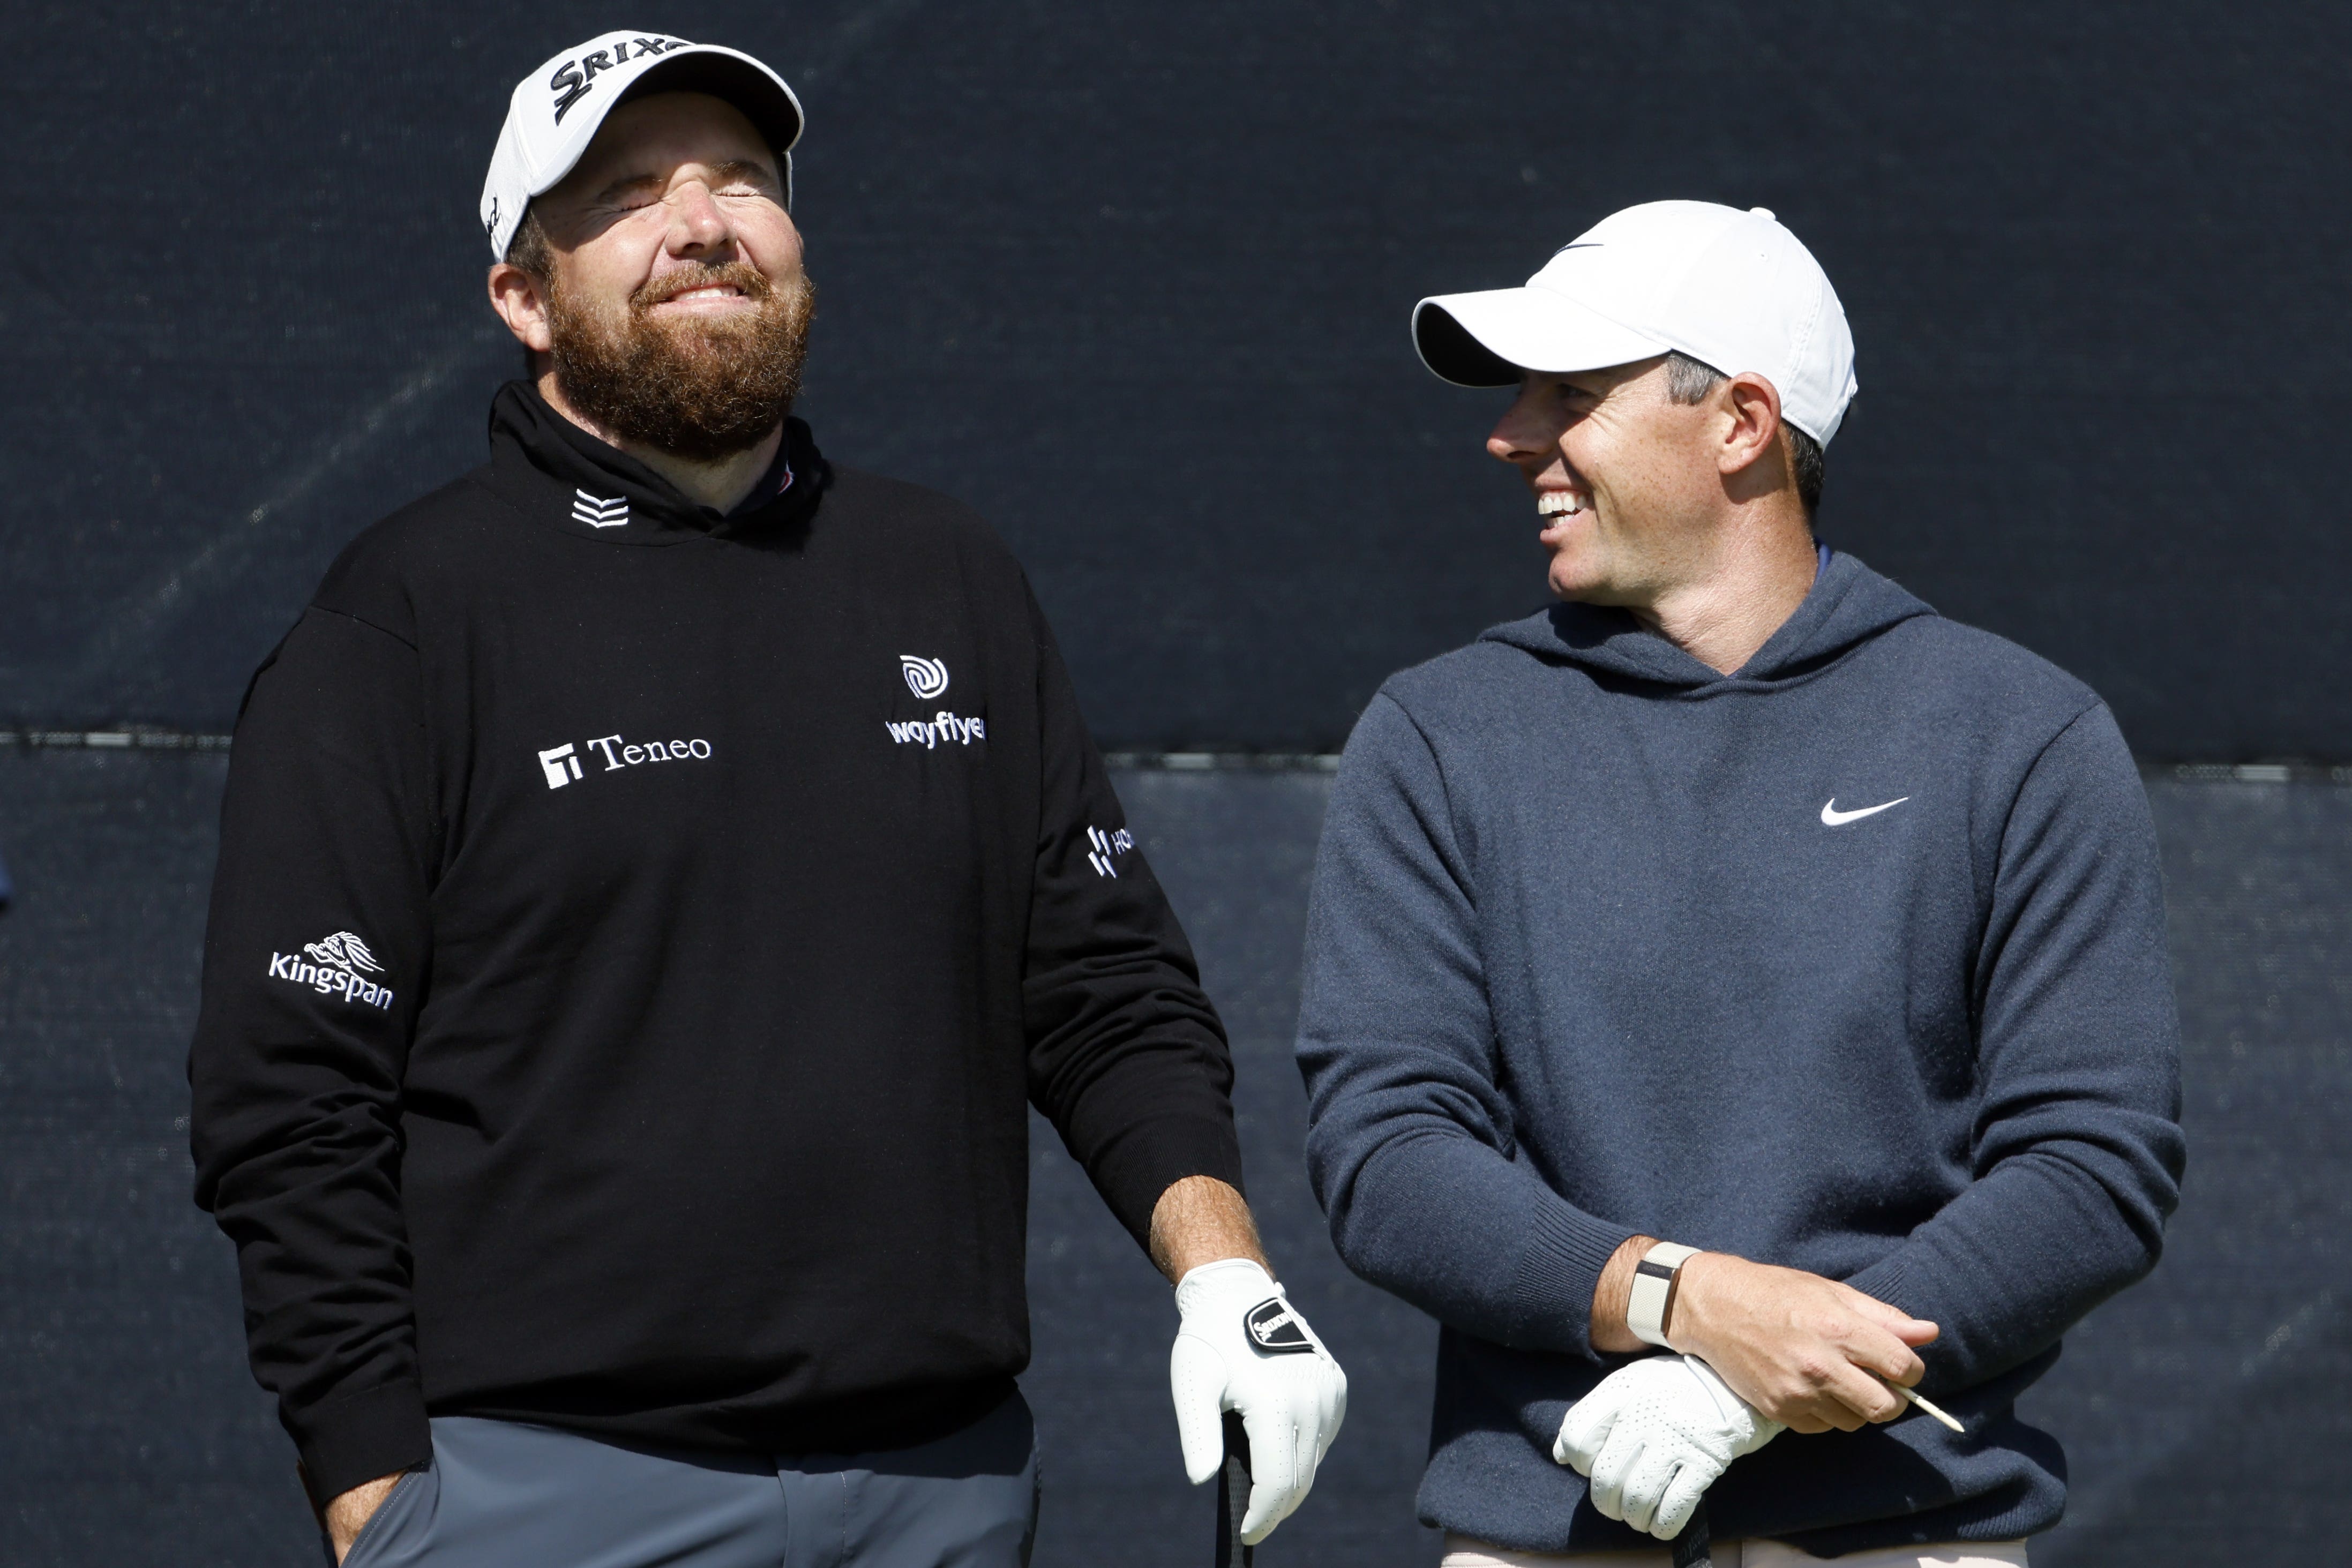 Shane Lowry determined to win another major as Open gets under way The Independent